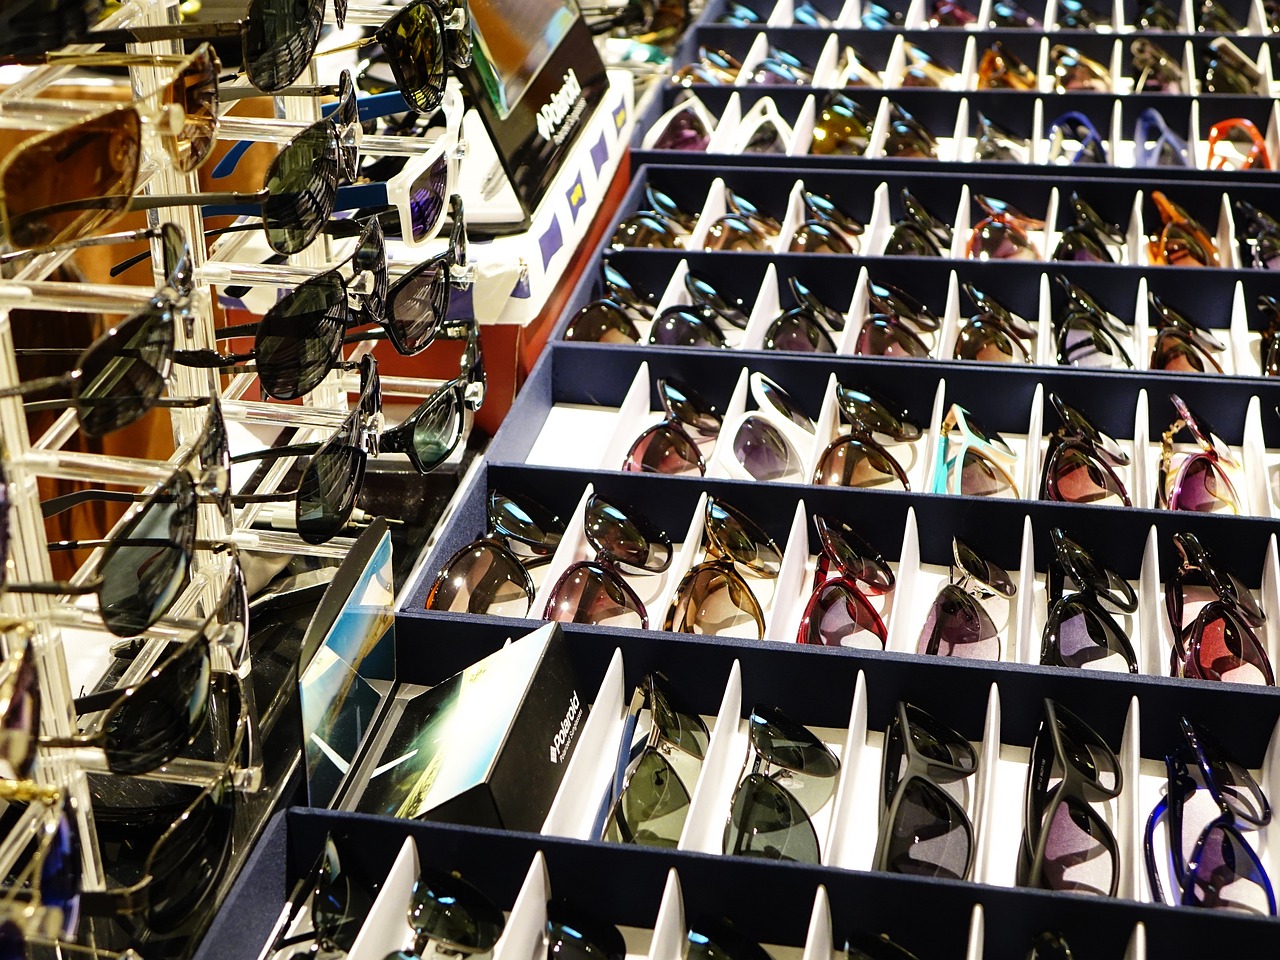 Collection of Sunglasses